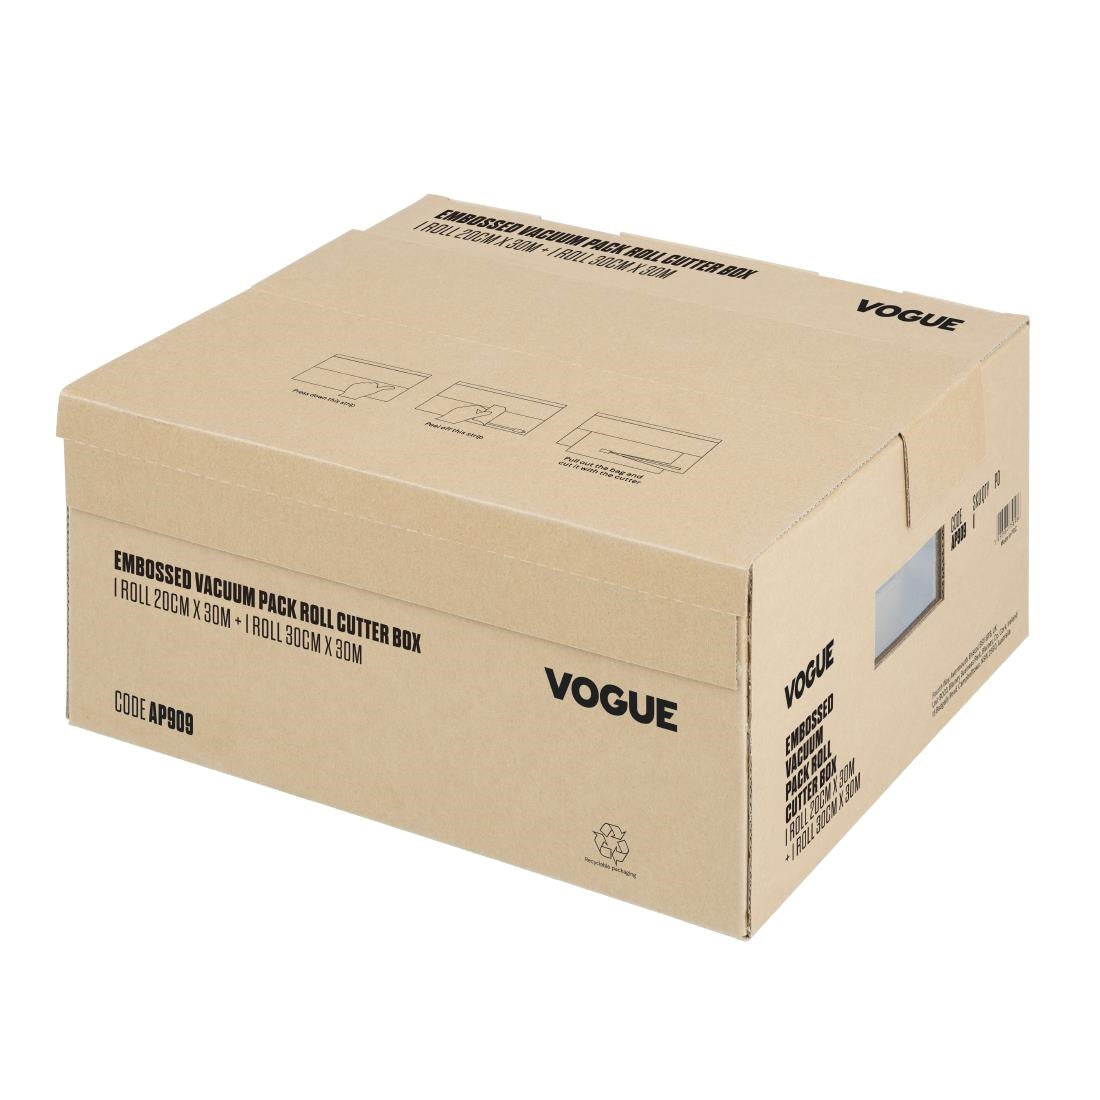 AP909 Vogue Vacuum Pack Roll with Cutter Box (Embossed) 200mm & 300mm Twin Pack